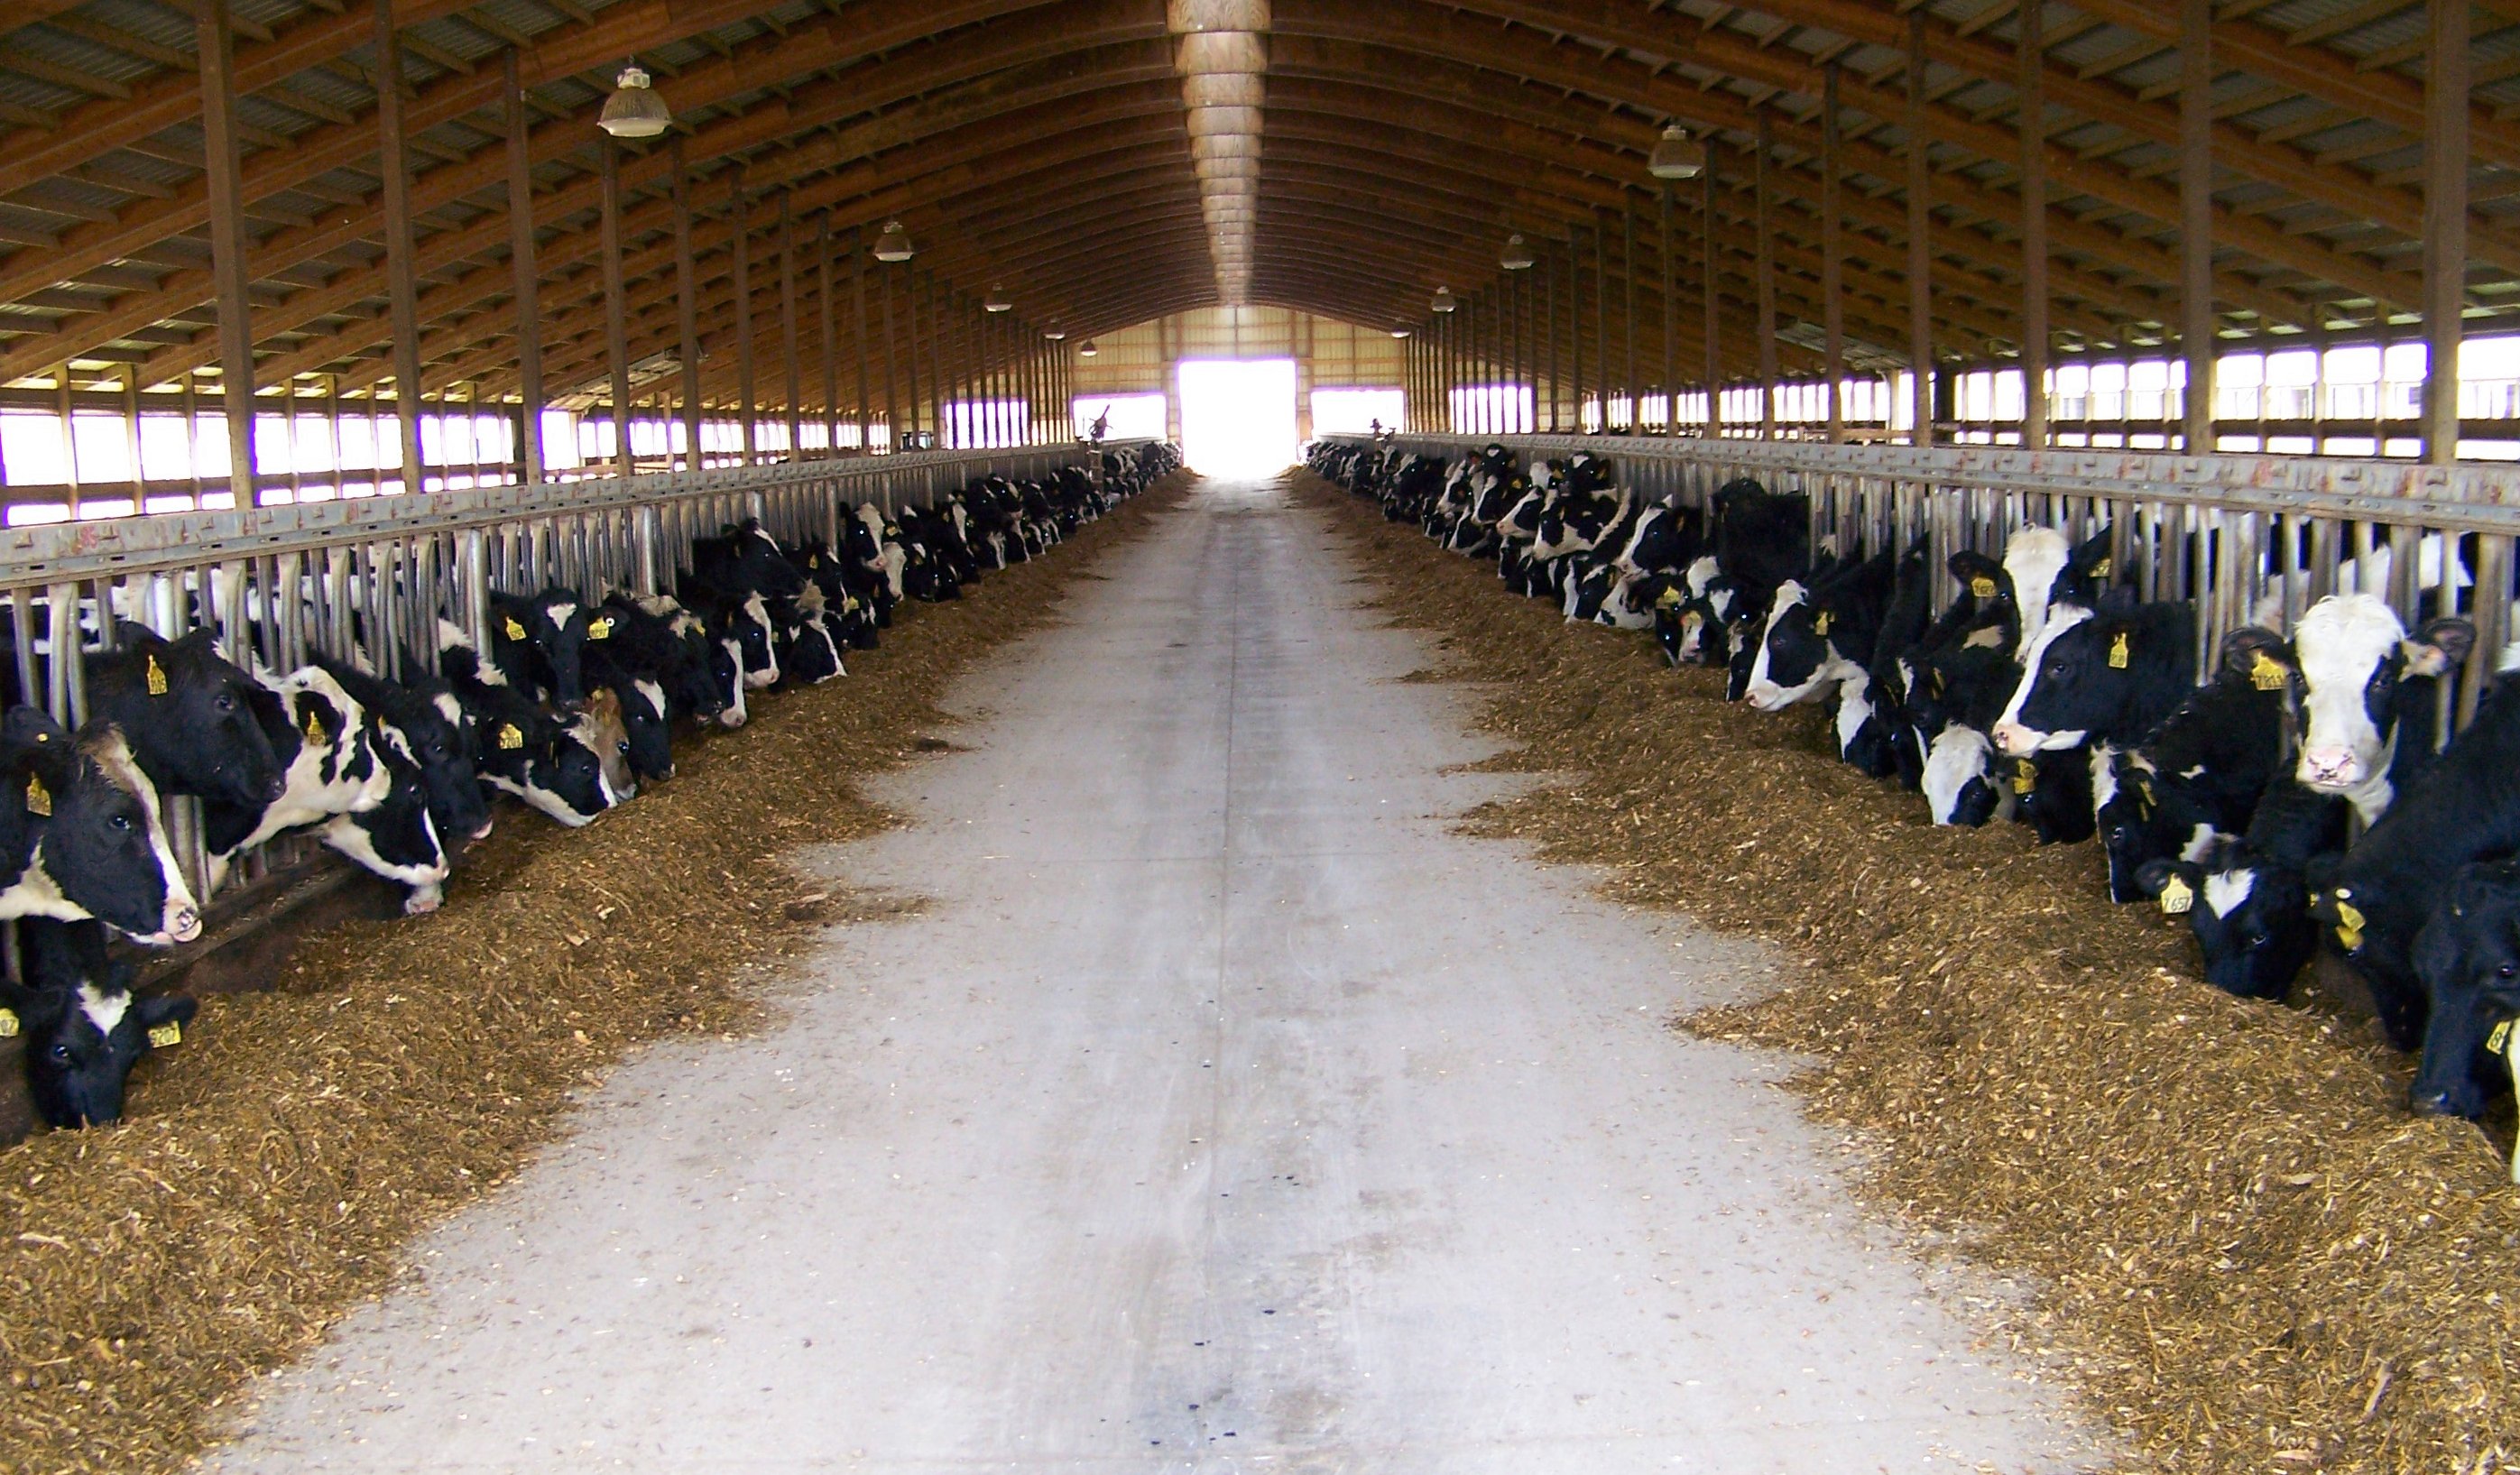 Cow Sheds